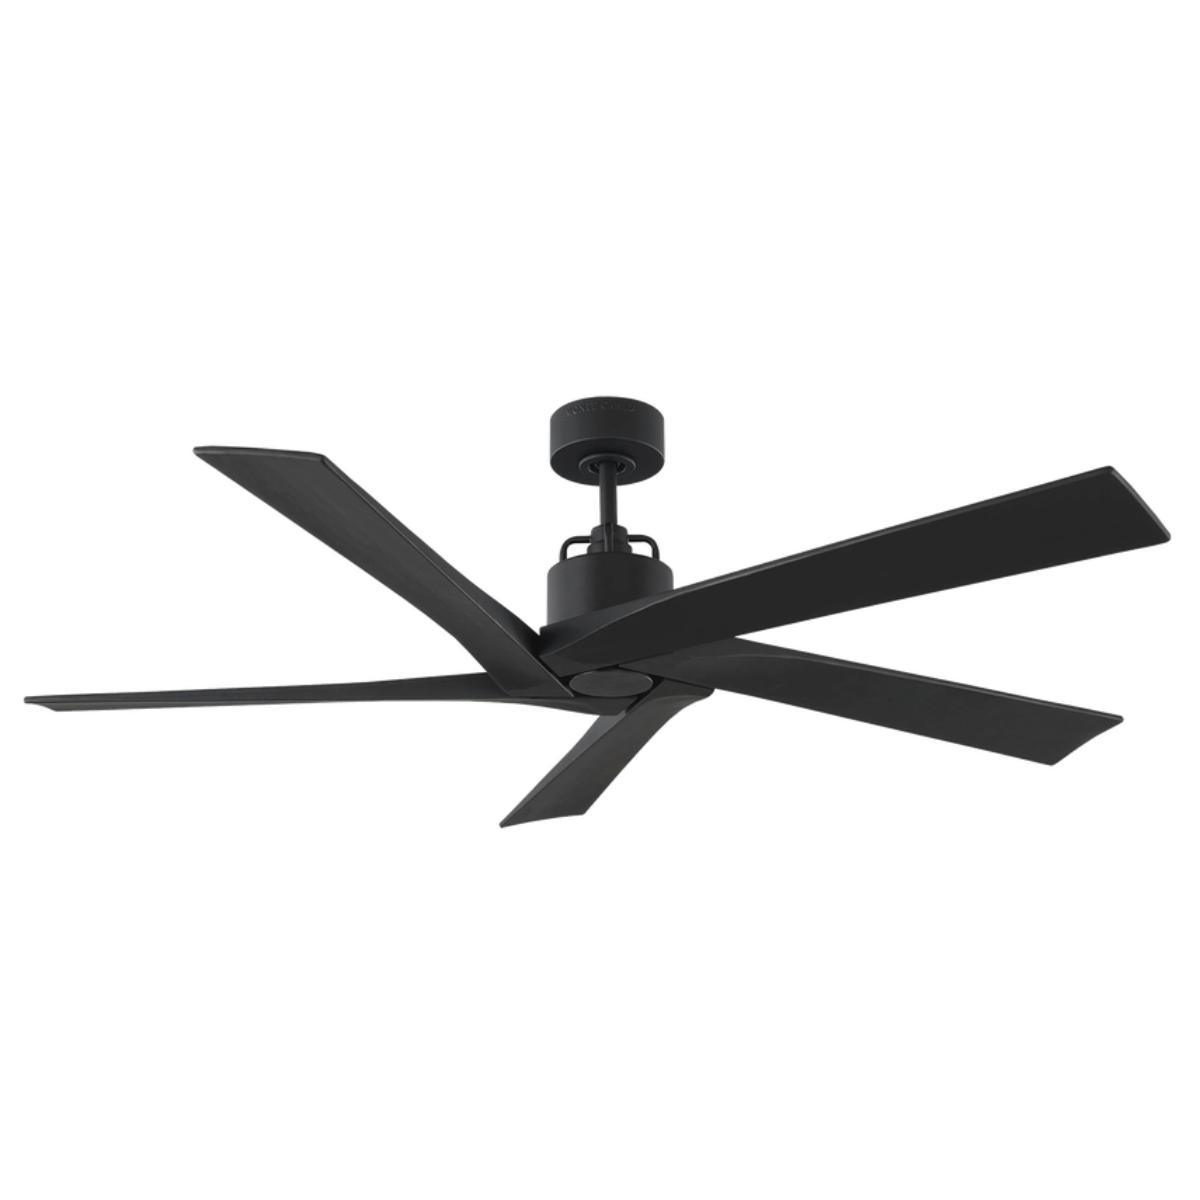 Aspen 56 Inch Ceiling Fan with Remote, Midnight Black Finish - Bees Lighting